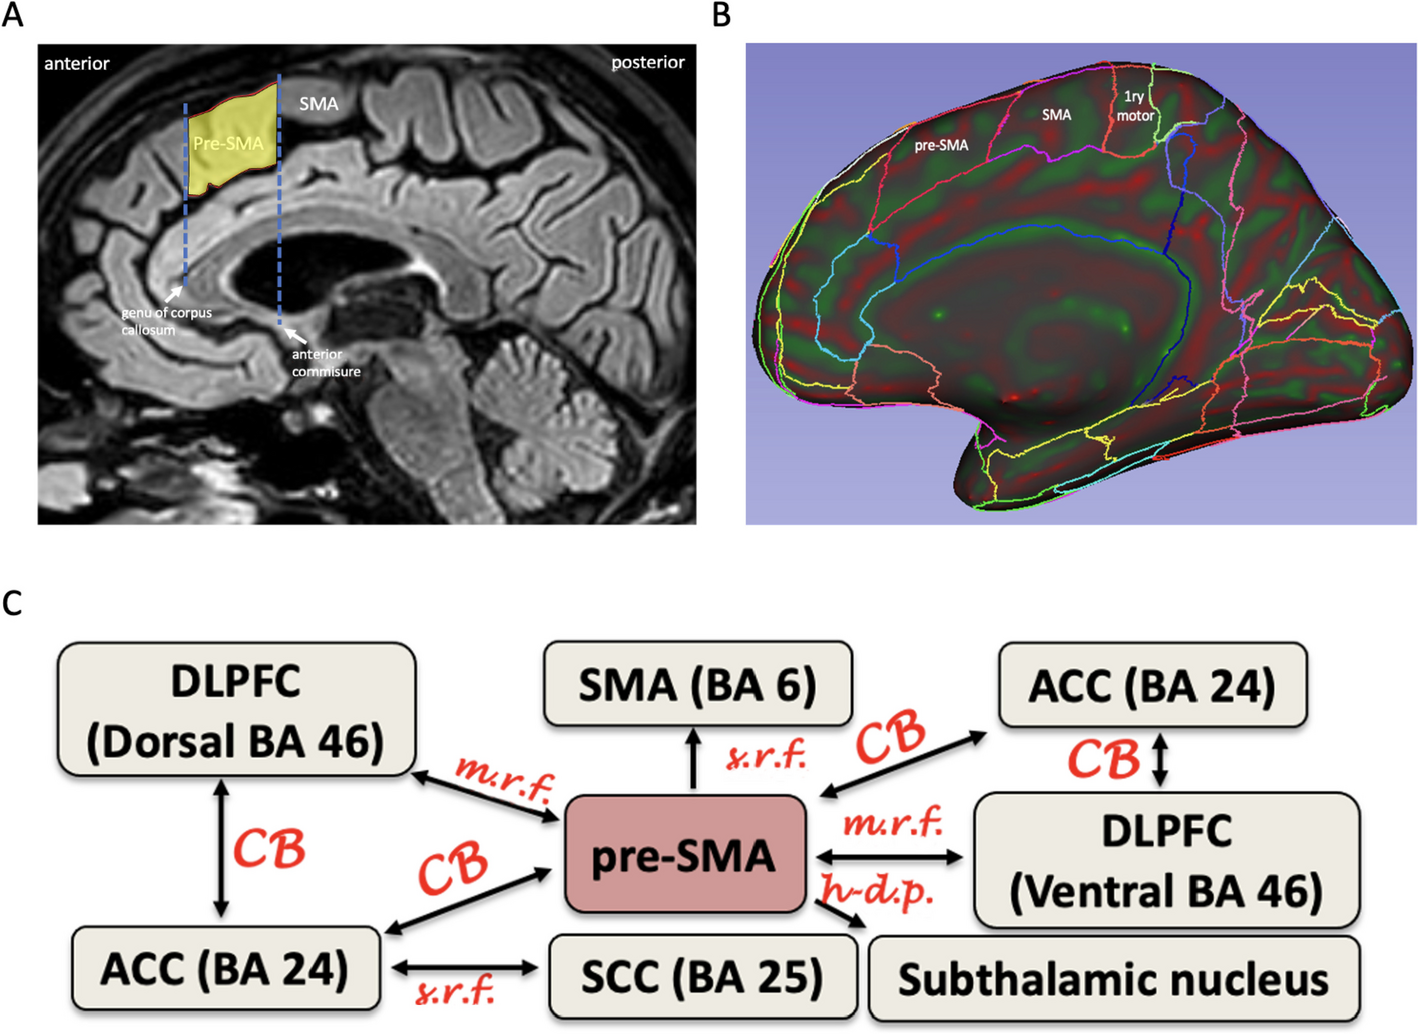 Treatment of Behavioral Addictions and Substance Use Disorders: a Focus on the Effects of Theta-Burst Stimulation Over the Pre-SMA